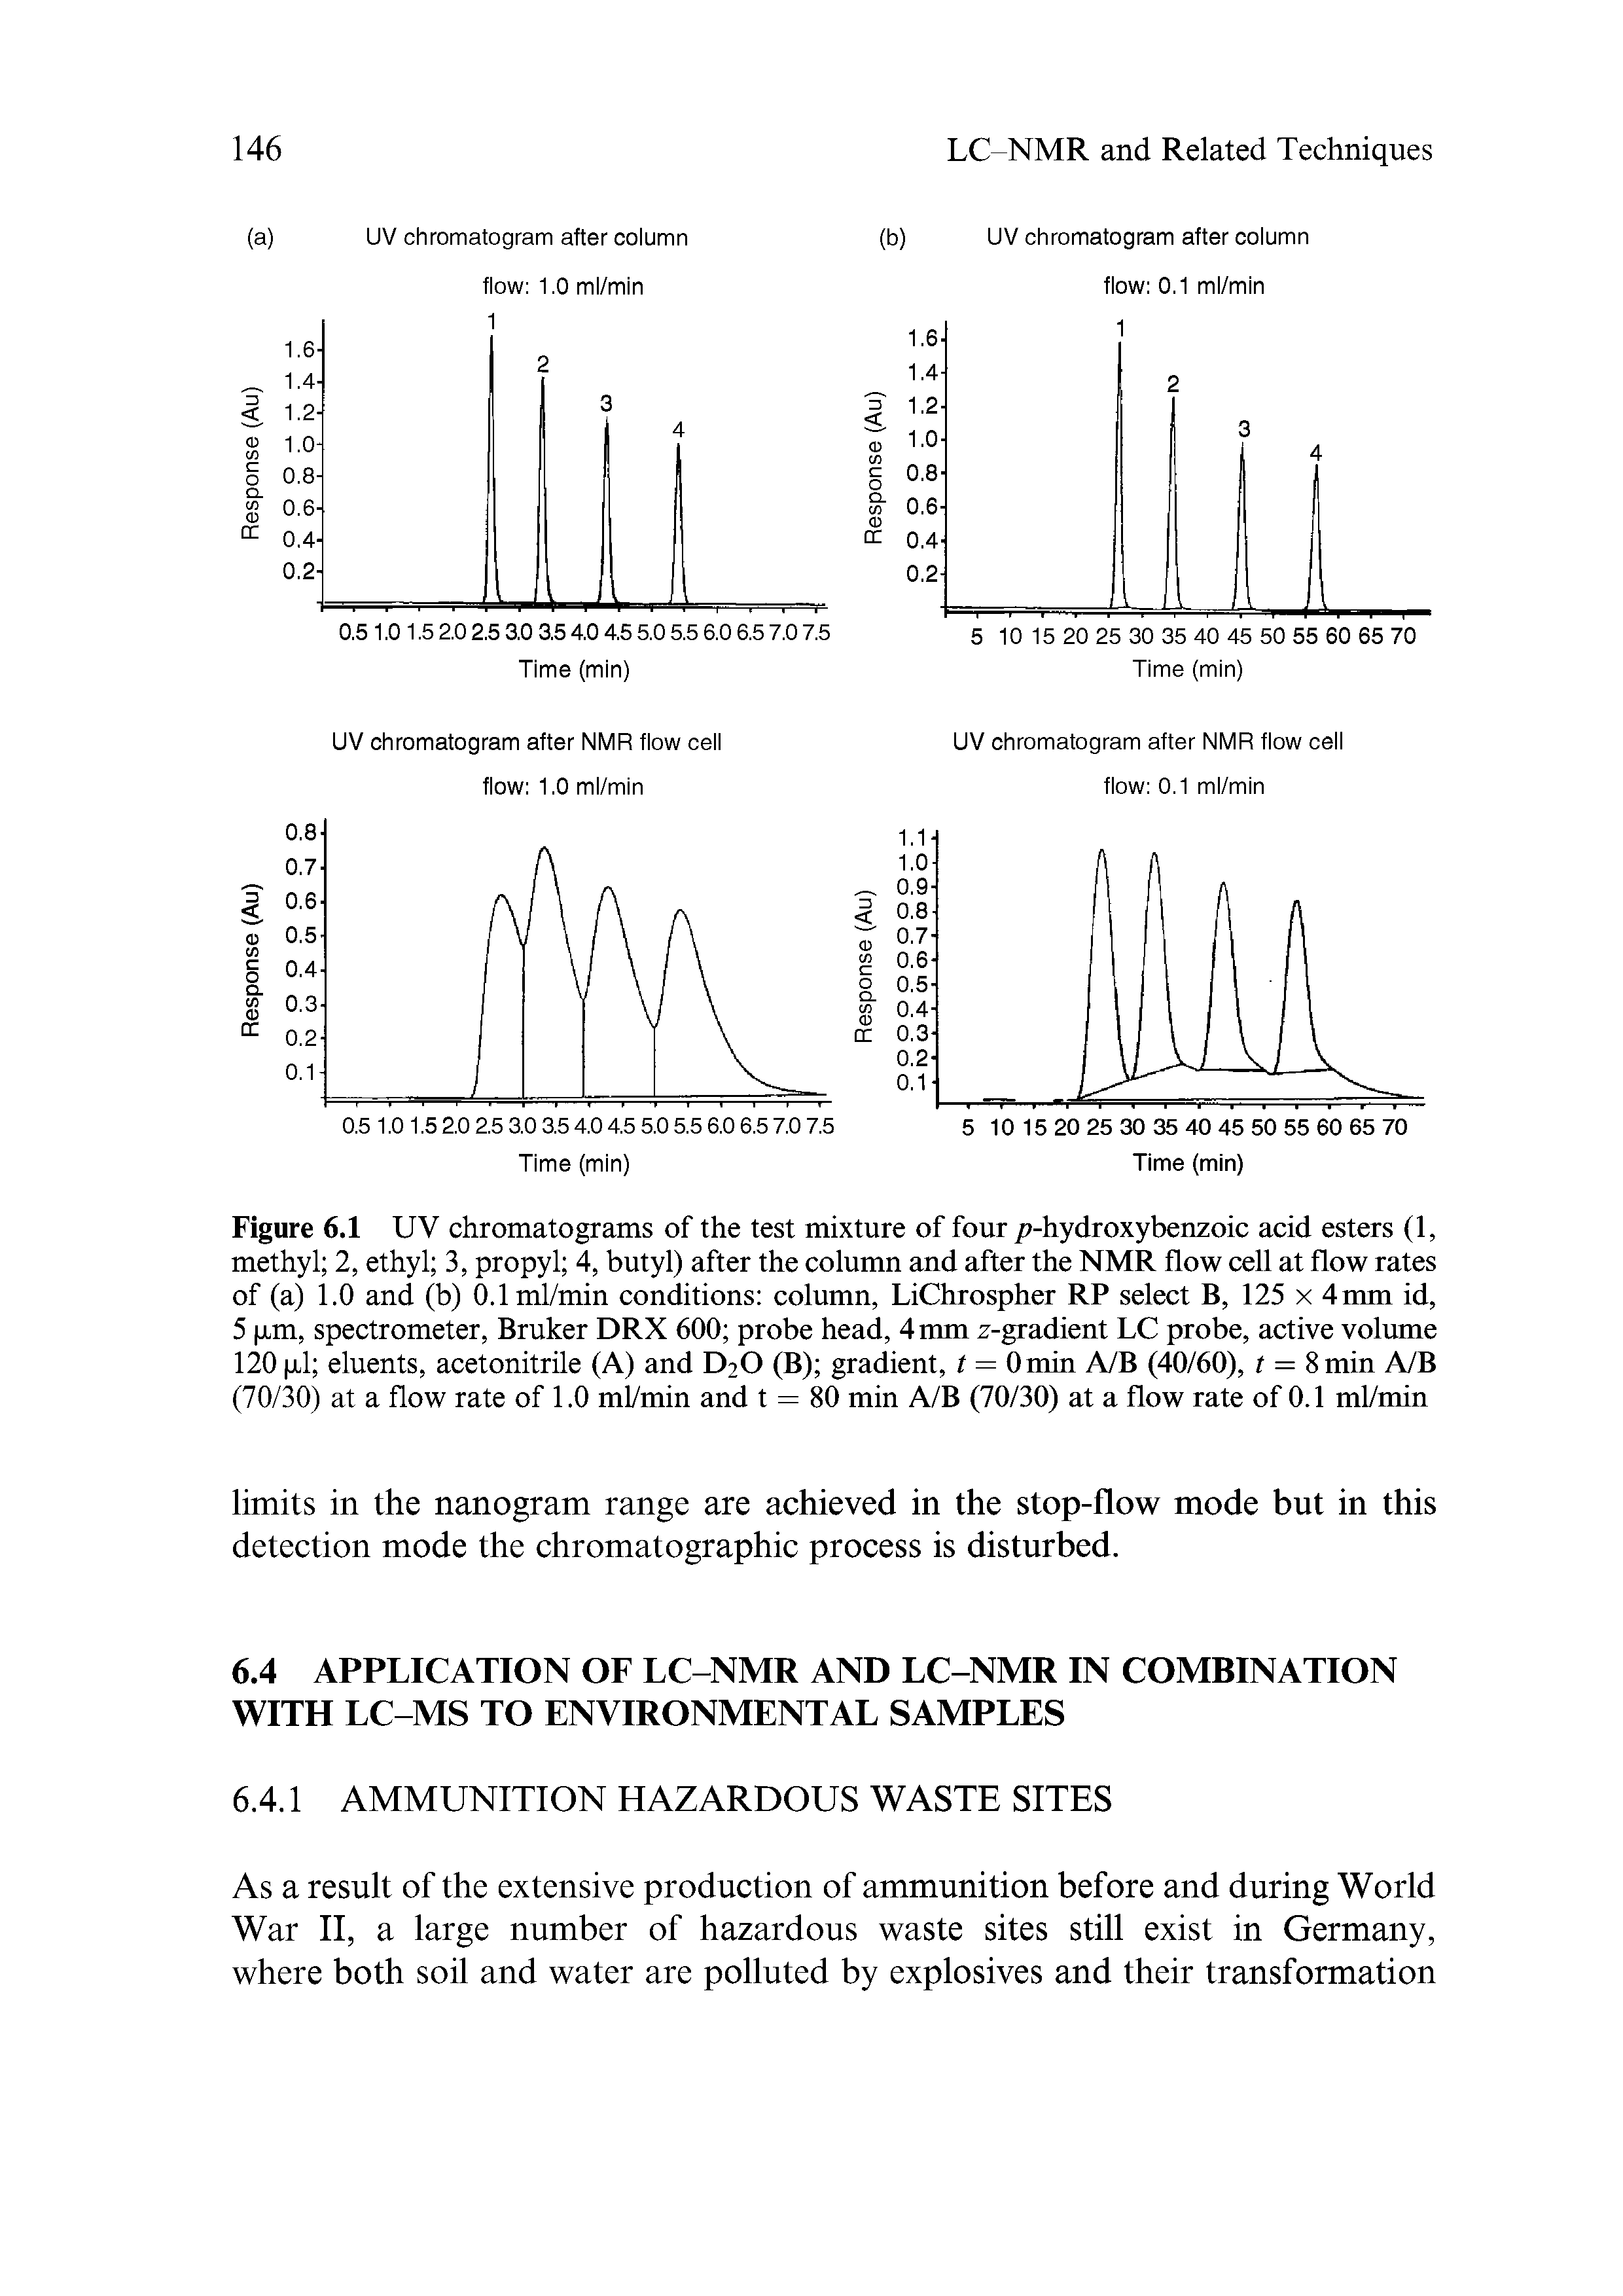 Figure 6.1 UV chromatograms of the test mixture of four / -hydroxybenzoic acid esters (1, methyl 2, ethyl 3, propyl 4, butyl) after the column and after the NMR flow cell at flow rates of (a) 1.0 and (b) 0.1 ml/min conditions column, LiChrospher RP select B, 125 x 4 mm id, 5 Jim, spectrometer, Bruker DRX 600 probe head, 4 mm z-gradient LC probe, active volume 120 a1 eluents, acetonitrile (A) and D2O (B) gradient, t = Omin A/B (40/60), t = 8 min A/B (70/30) at a flow rate of 1.0 ml/min and t = 80 min A/B (70/30) at a flow rate of 0.1 ml/min...